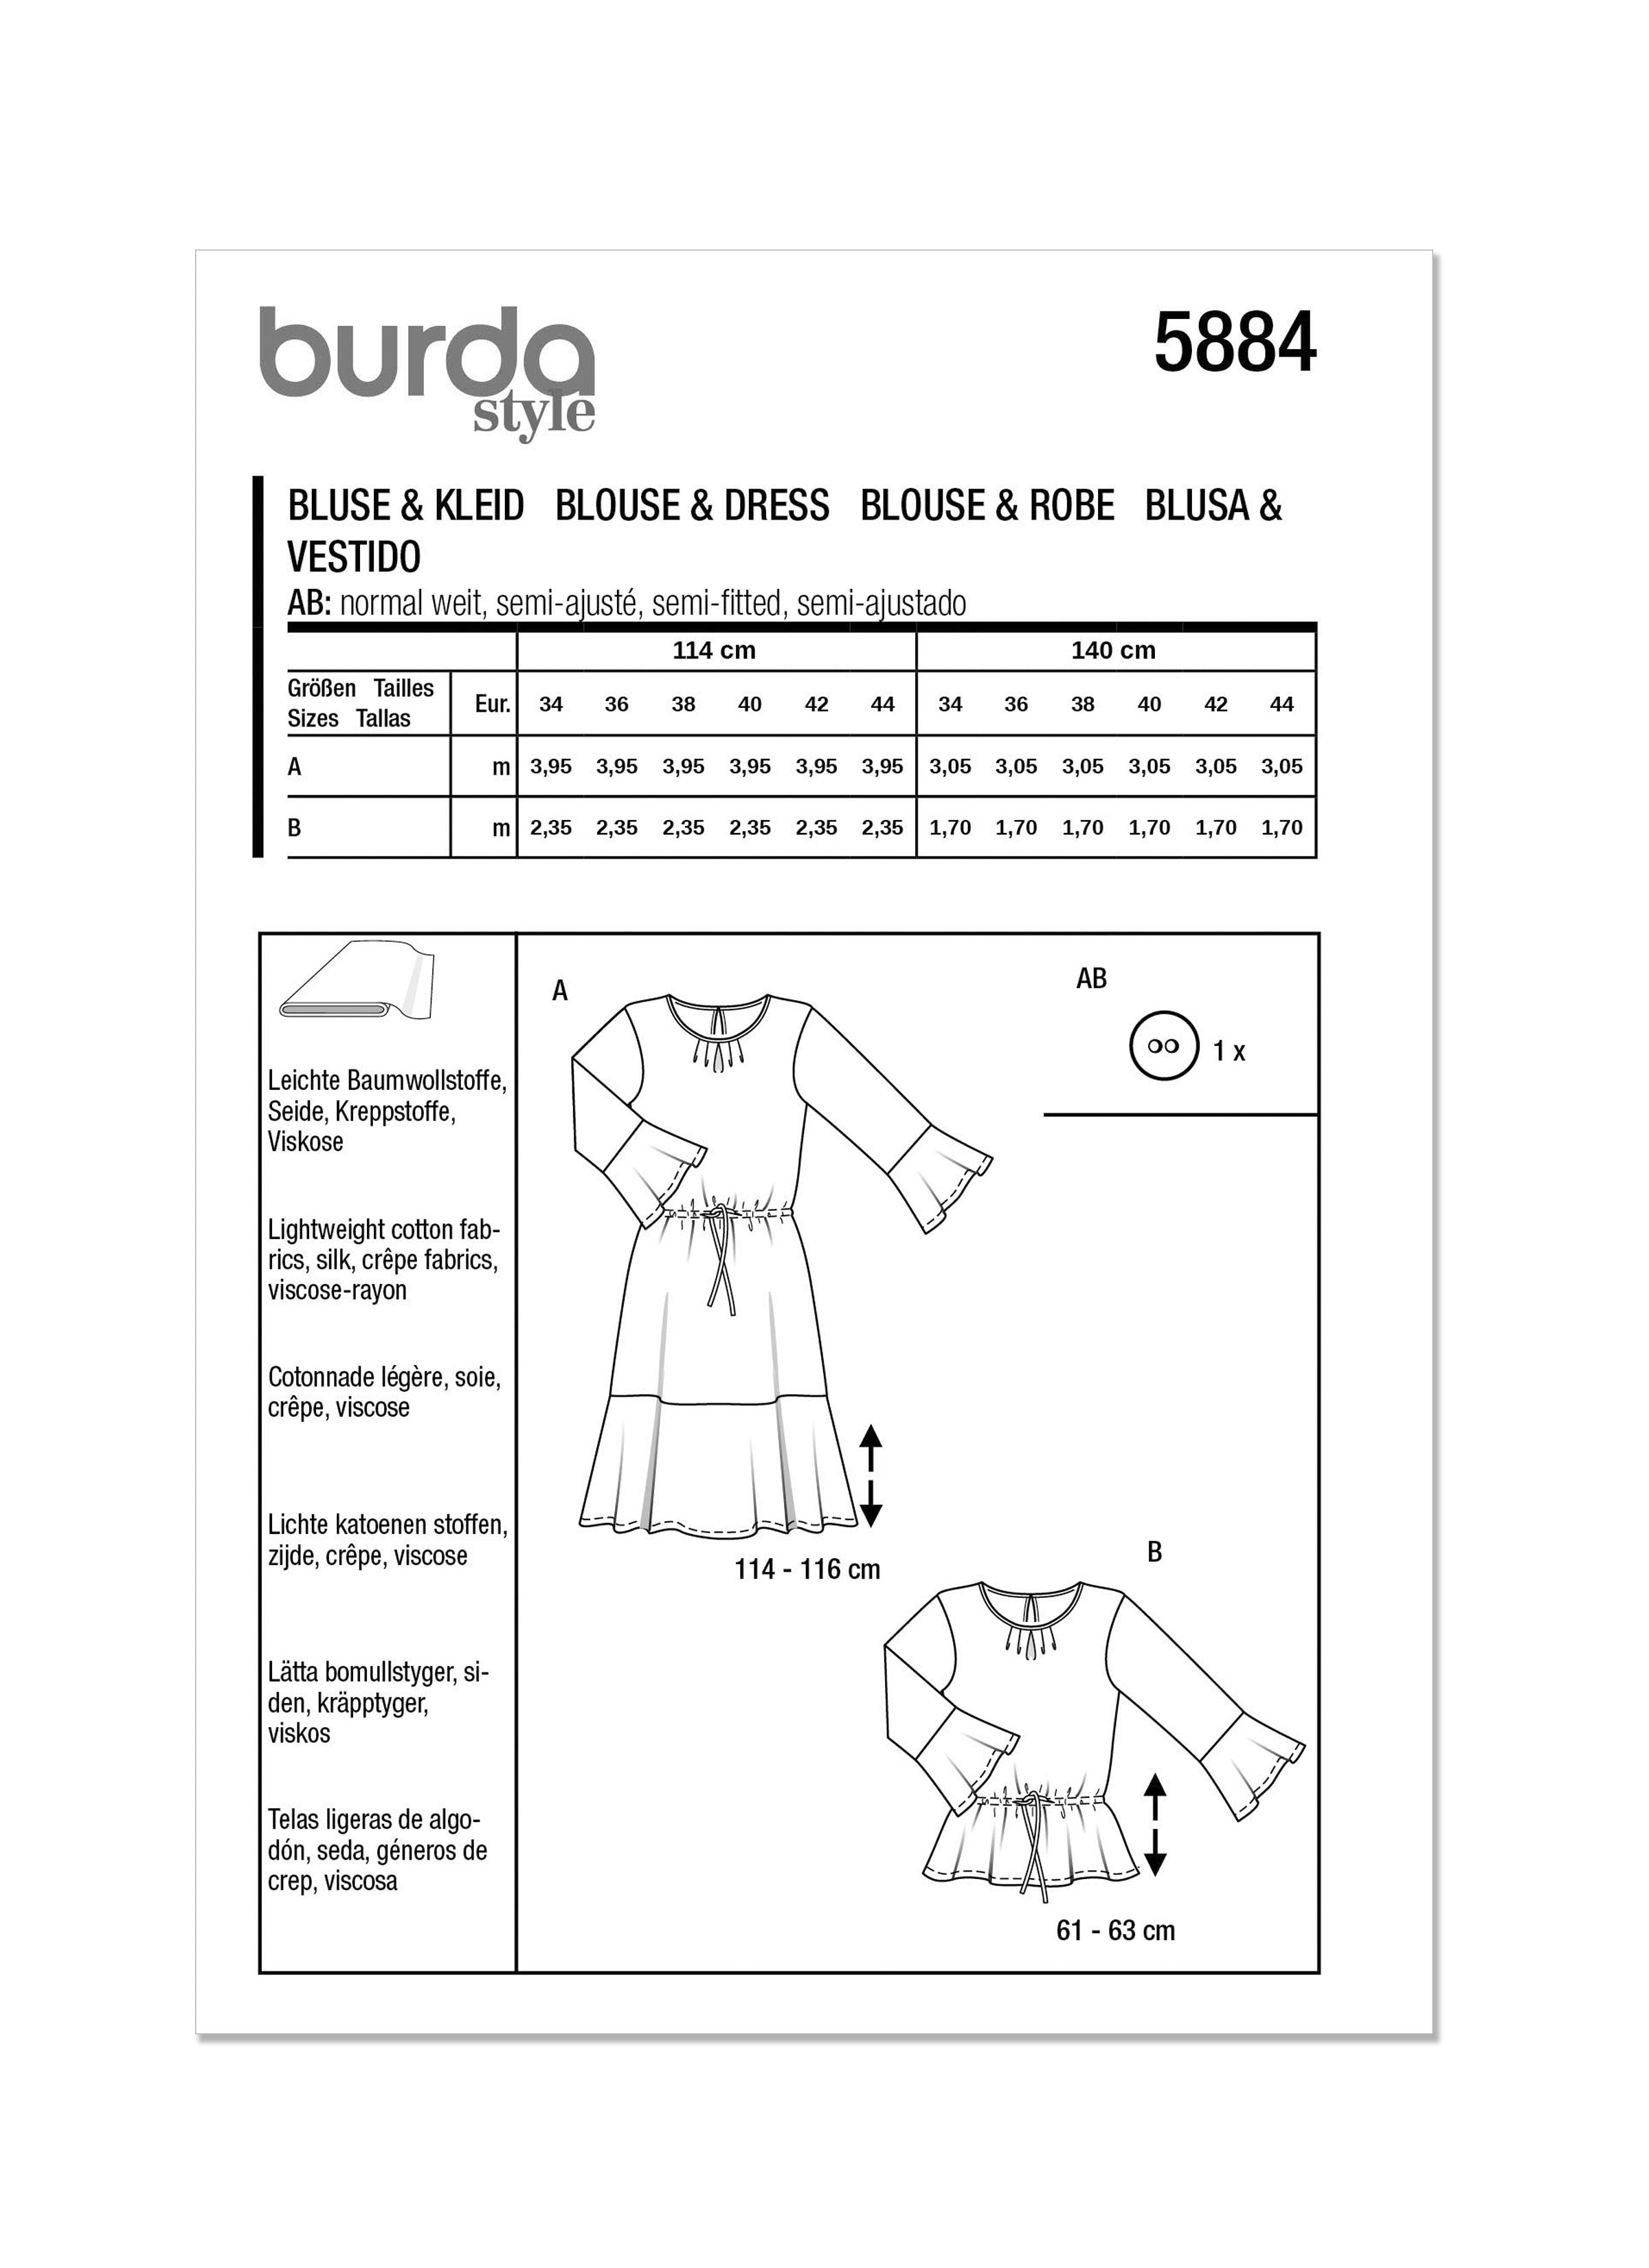 Burda Sewing Pattern 5884 Misses' Blouse and Dress from Jaycotts Sewing Supplies